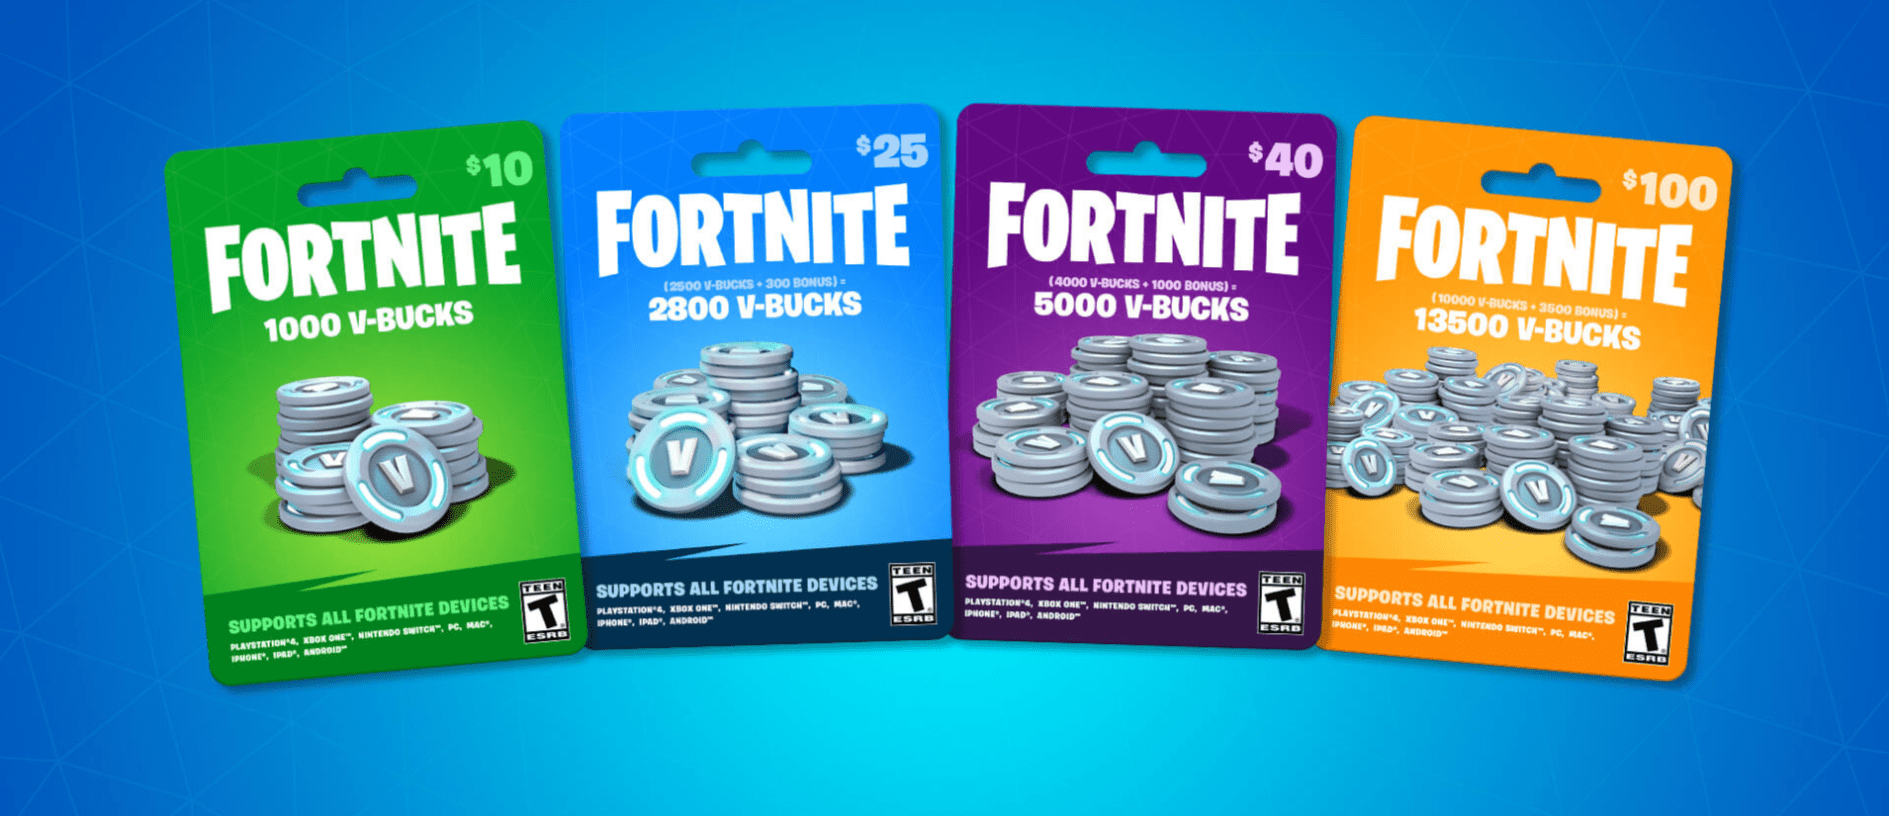 Fortnite V-Bucks Can Now Be Purchased From Retailers Across The US, Other Countries Soon